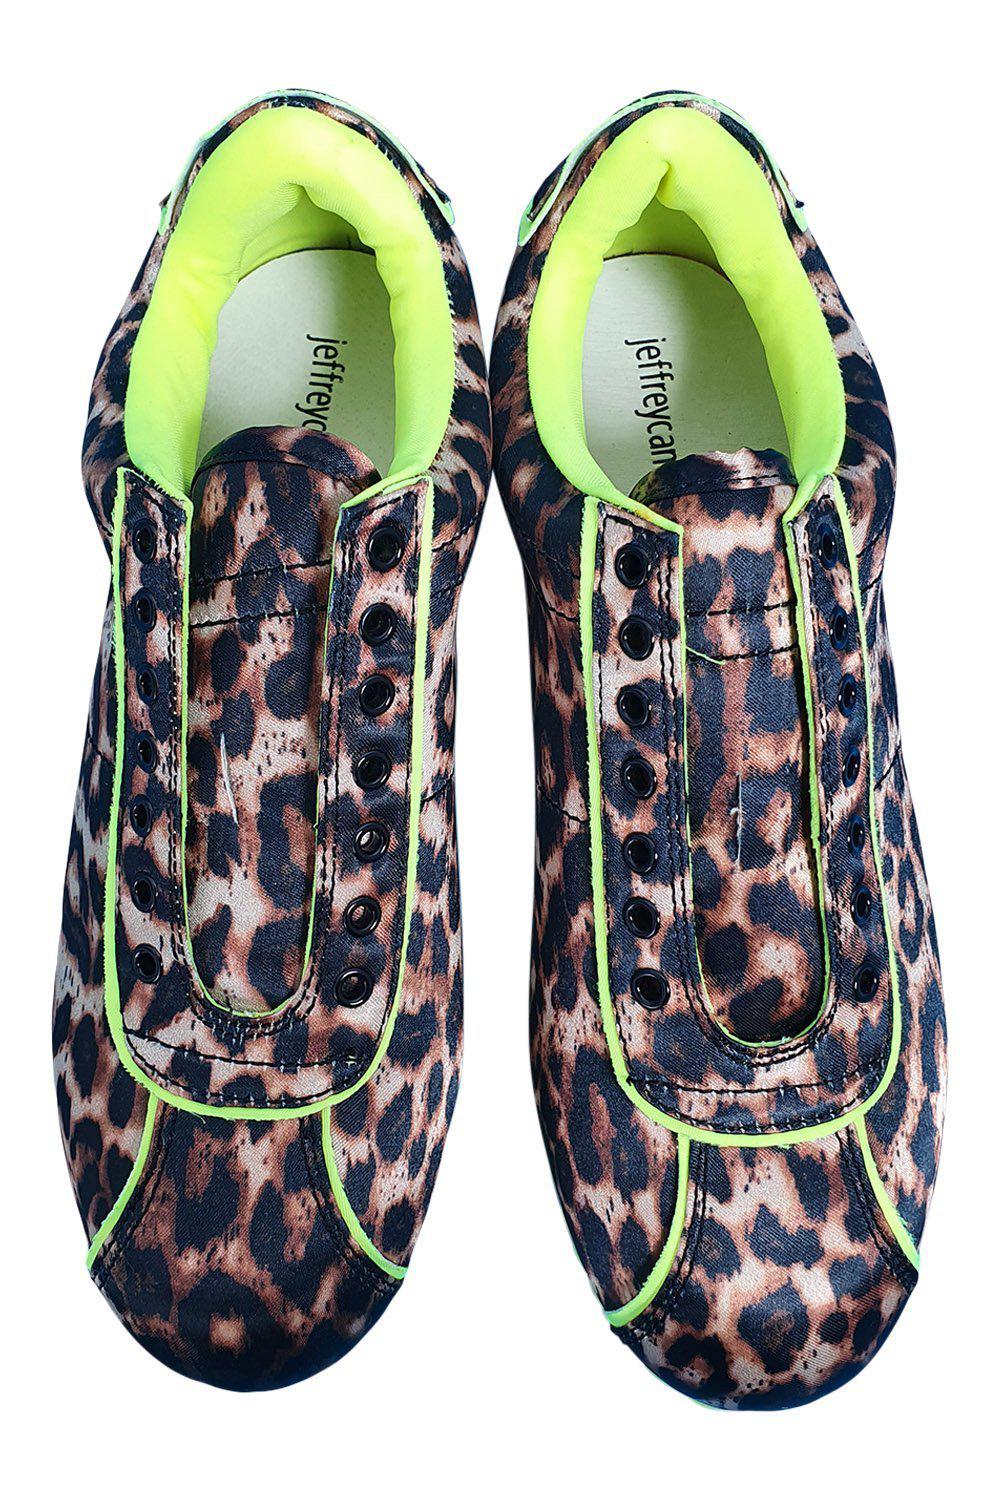 JEFFREY CAMPBELL Sprinter-b Rally Sneaker In Cheetah Satin/ Neon Yellow (US 7 | UK 4)-Jeffrey Campbell-The Freperie